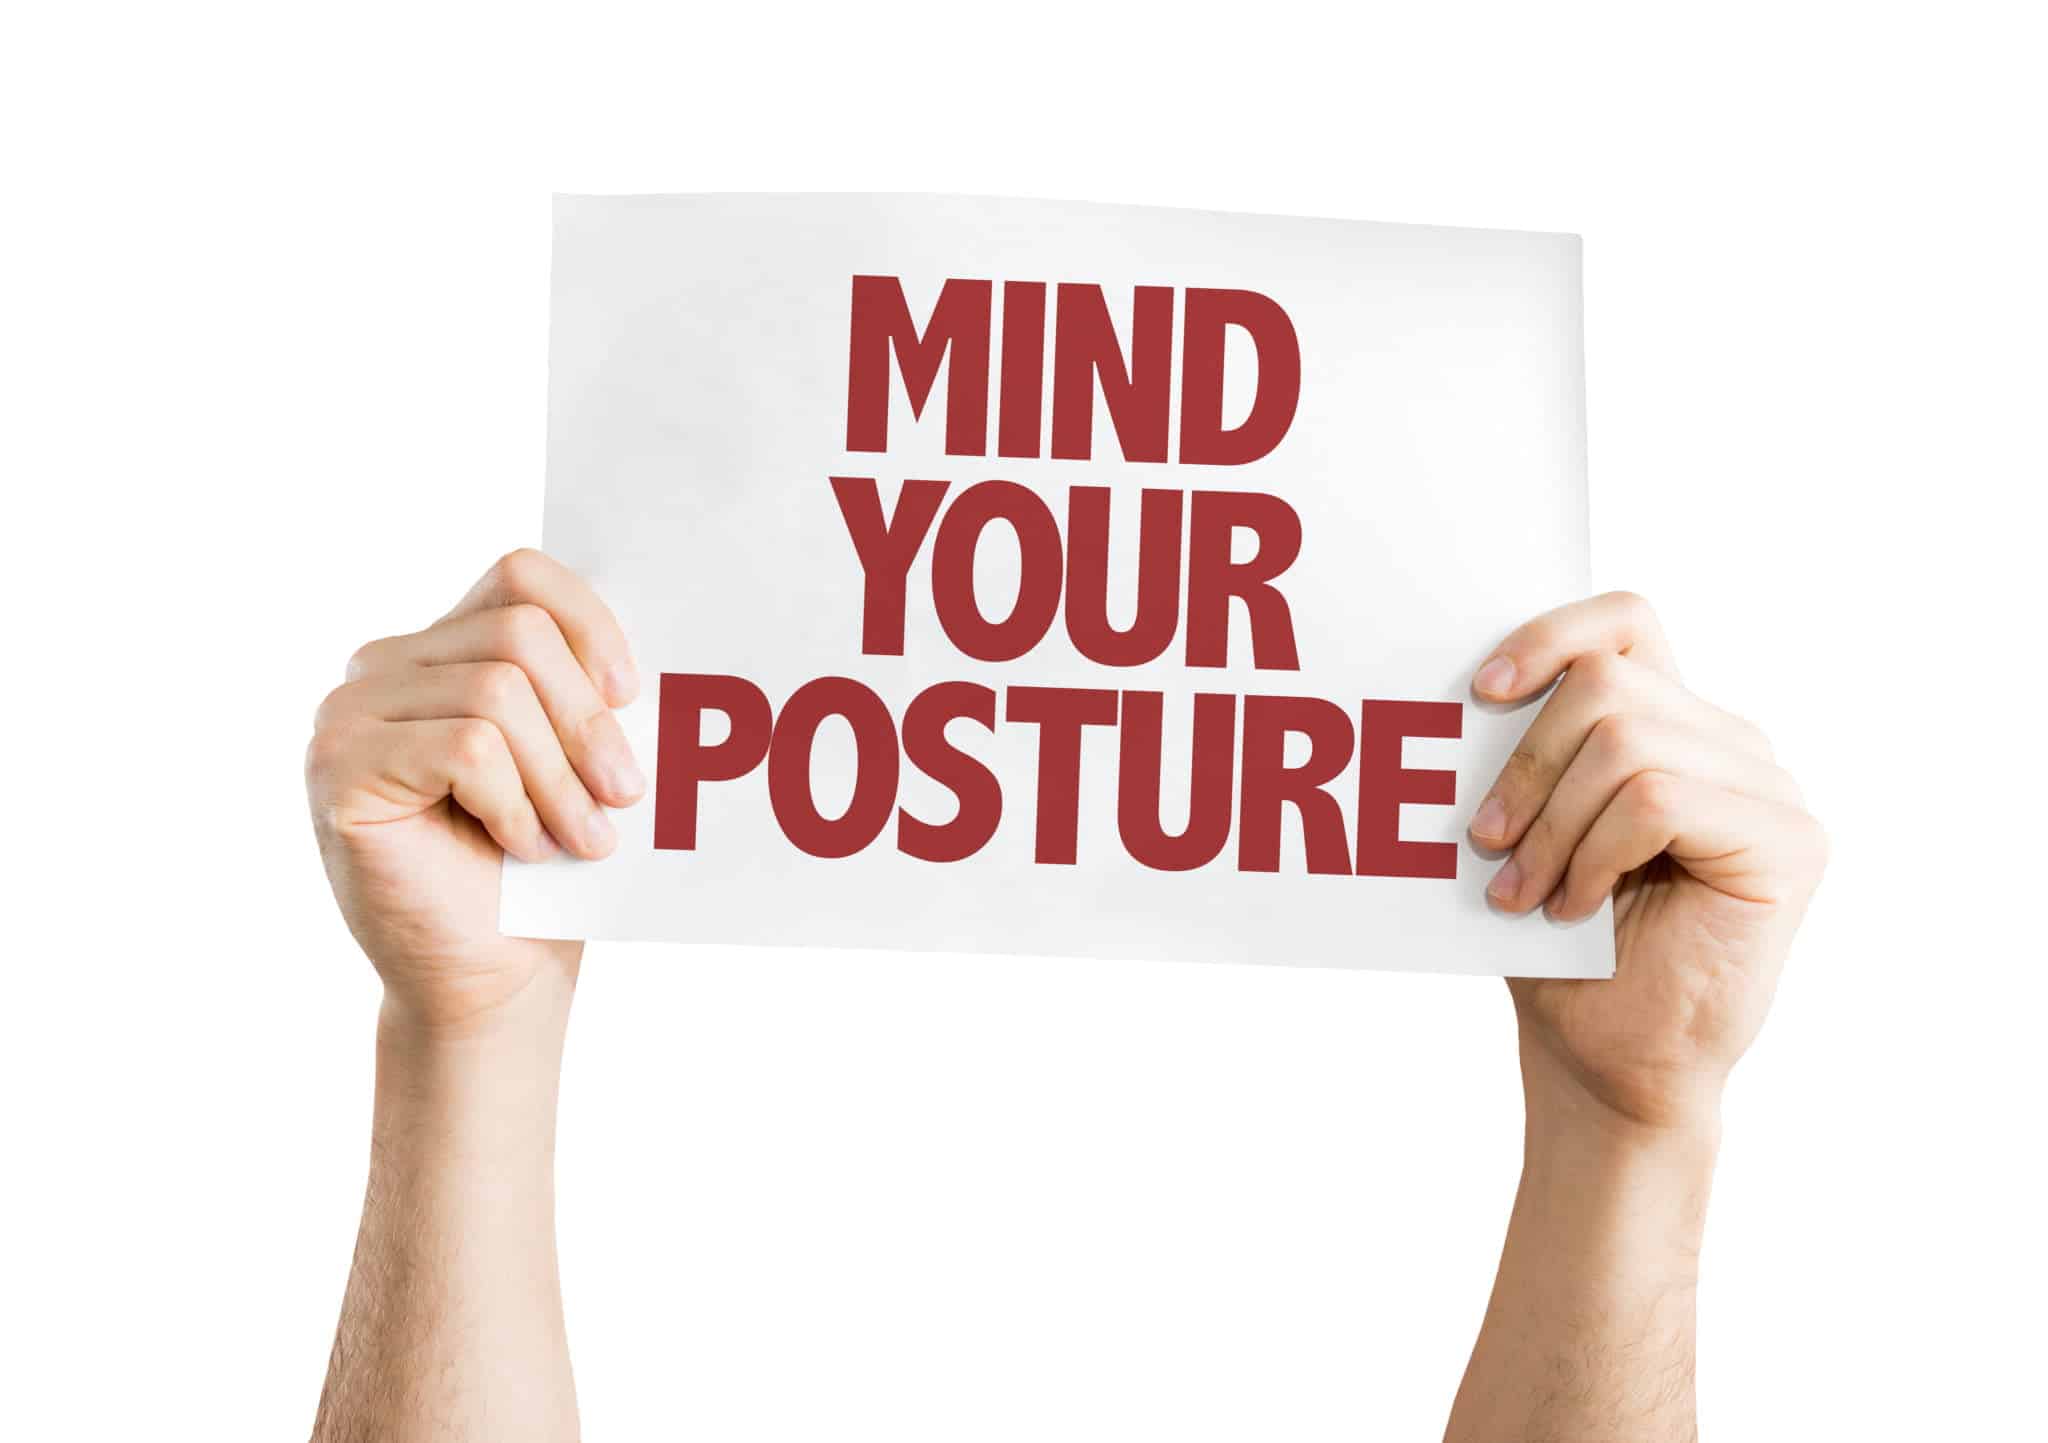 Good Posture To Minimize Your Chance of Injury